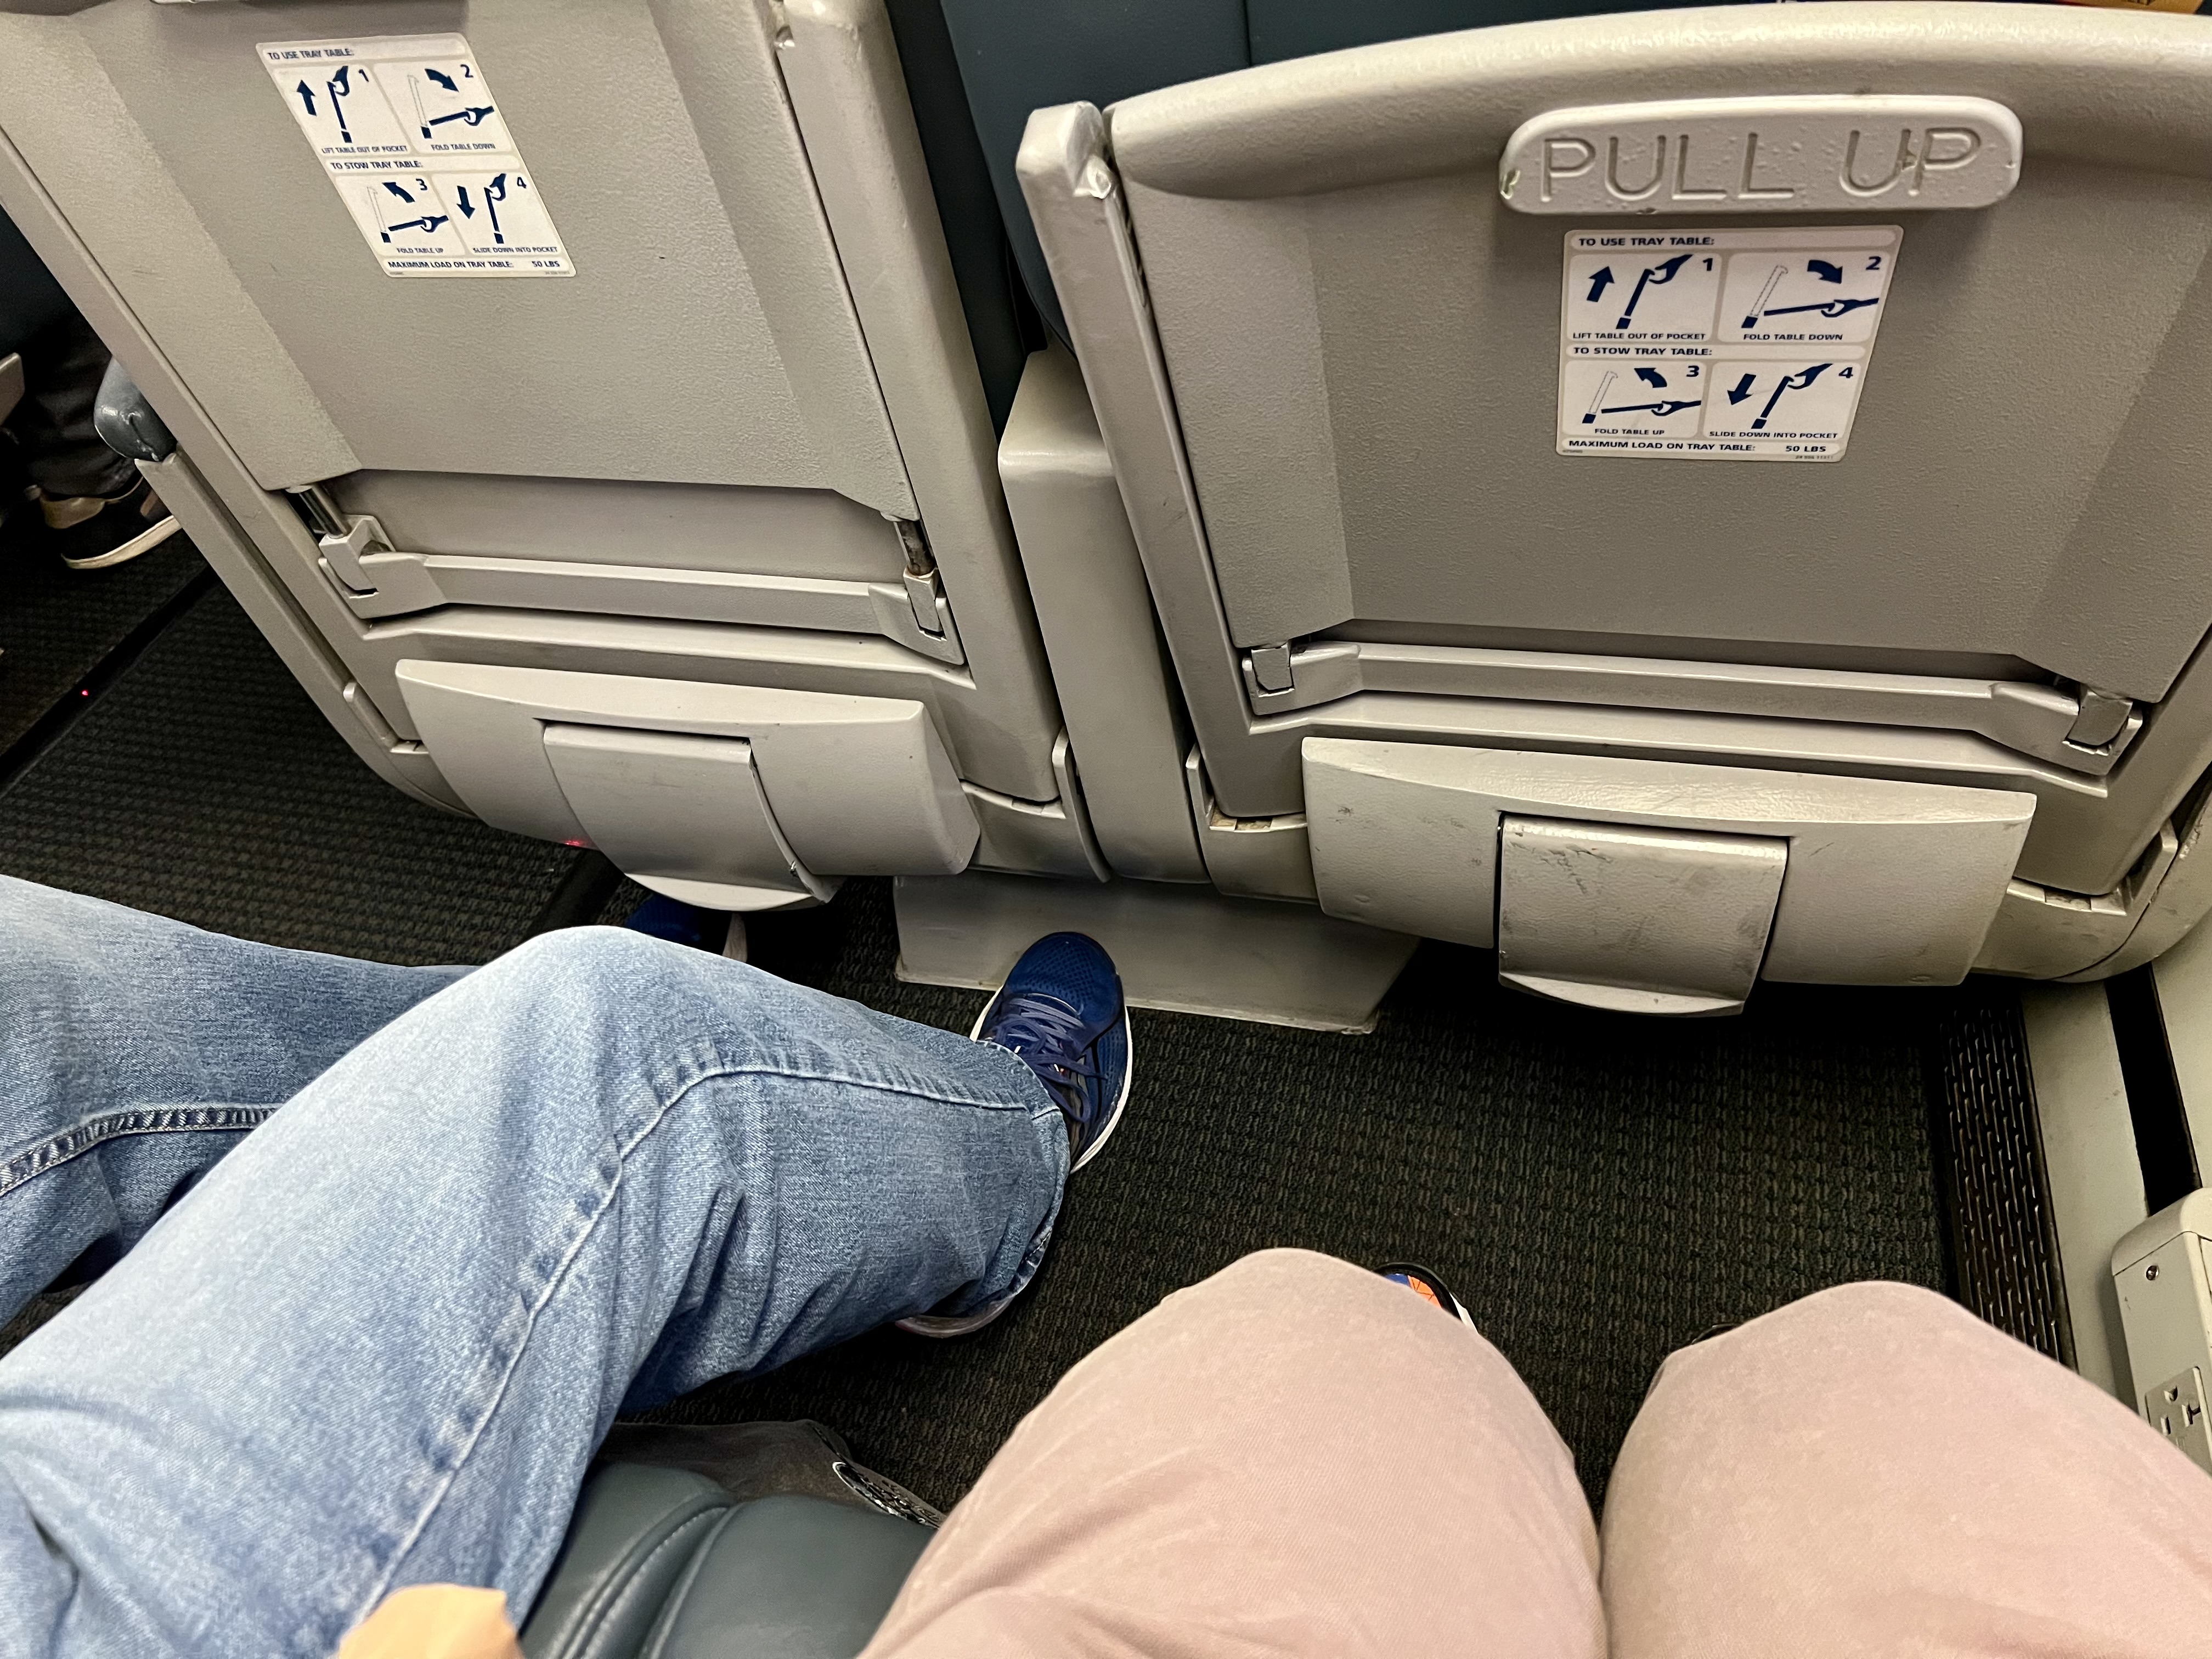 a pair of people's legs in an airplane